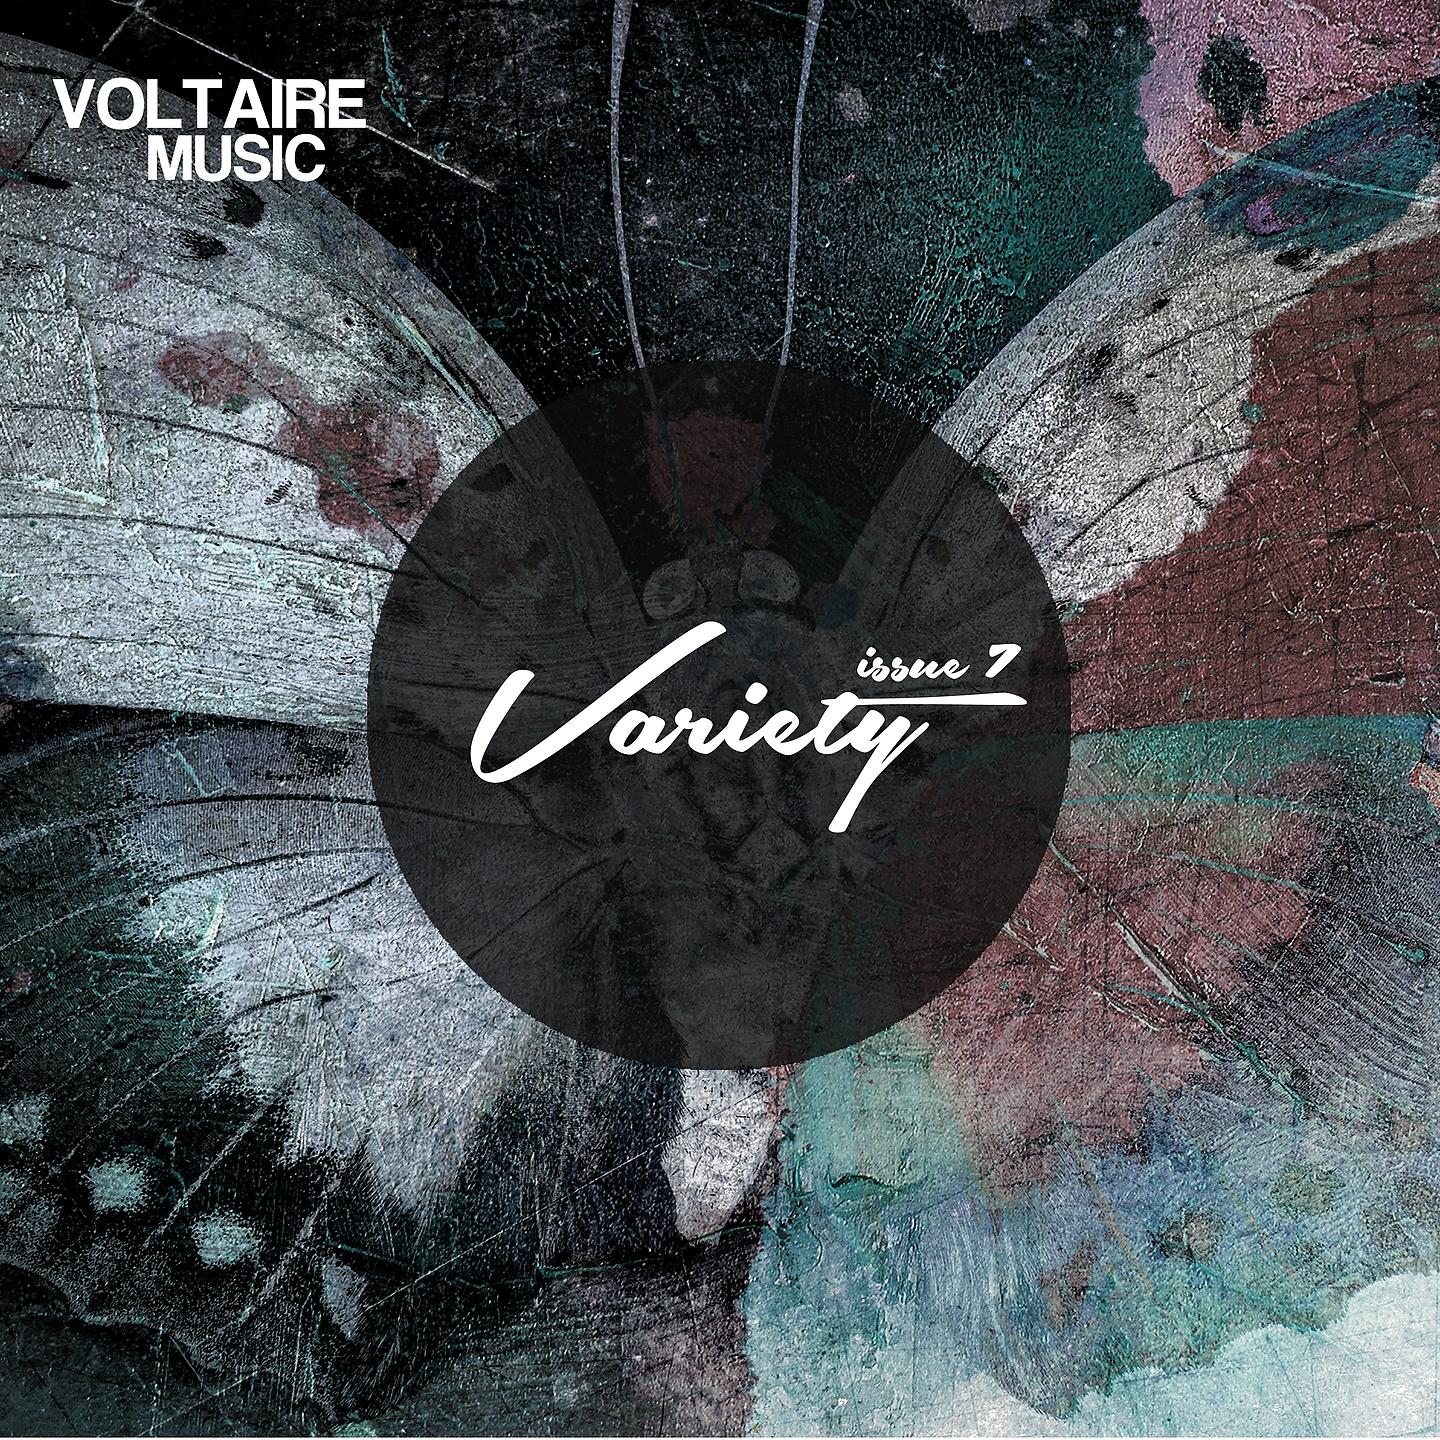 Постер альбома Voltaire Music pres. Variety Issue 7